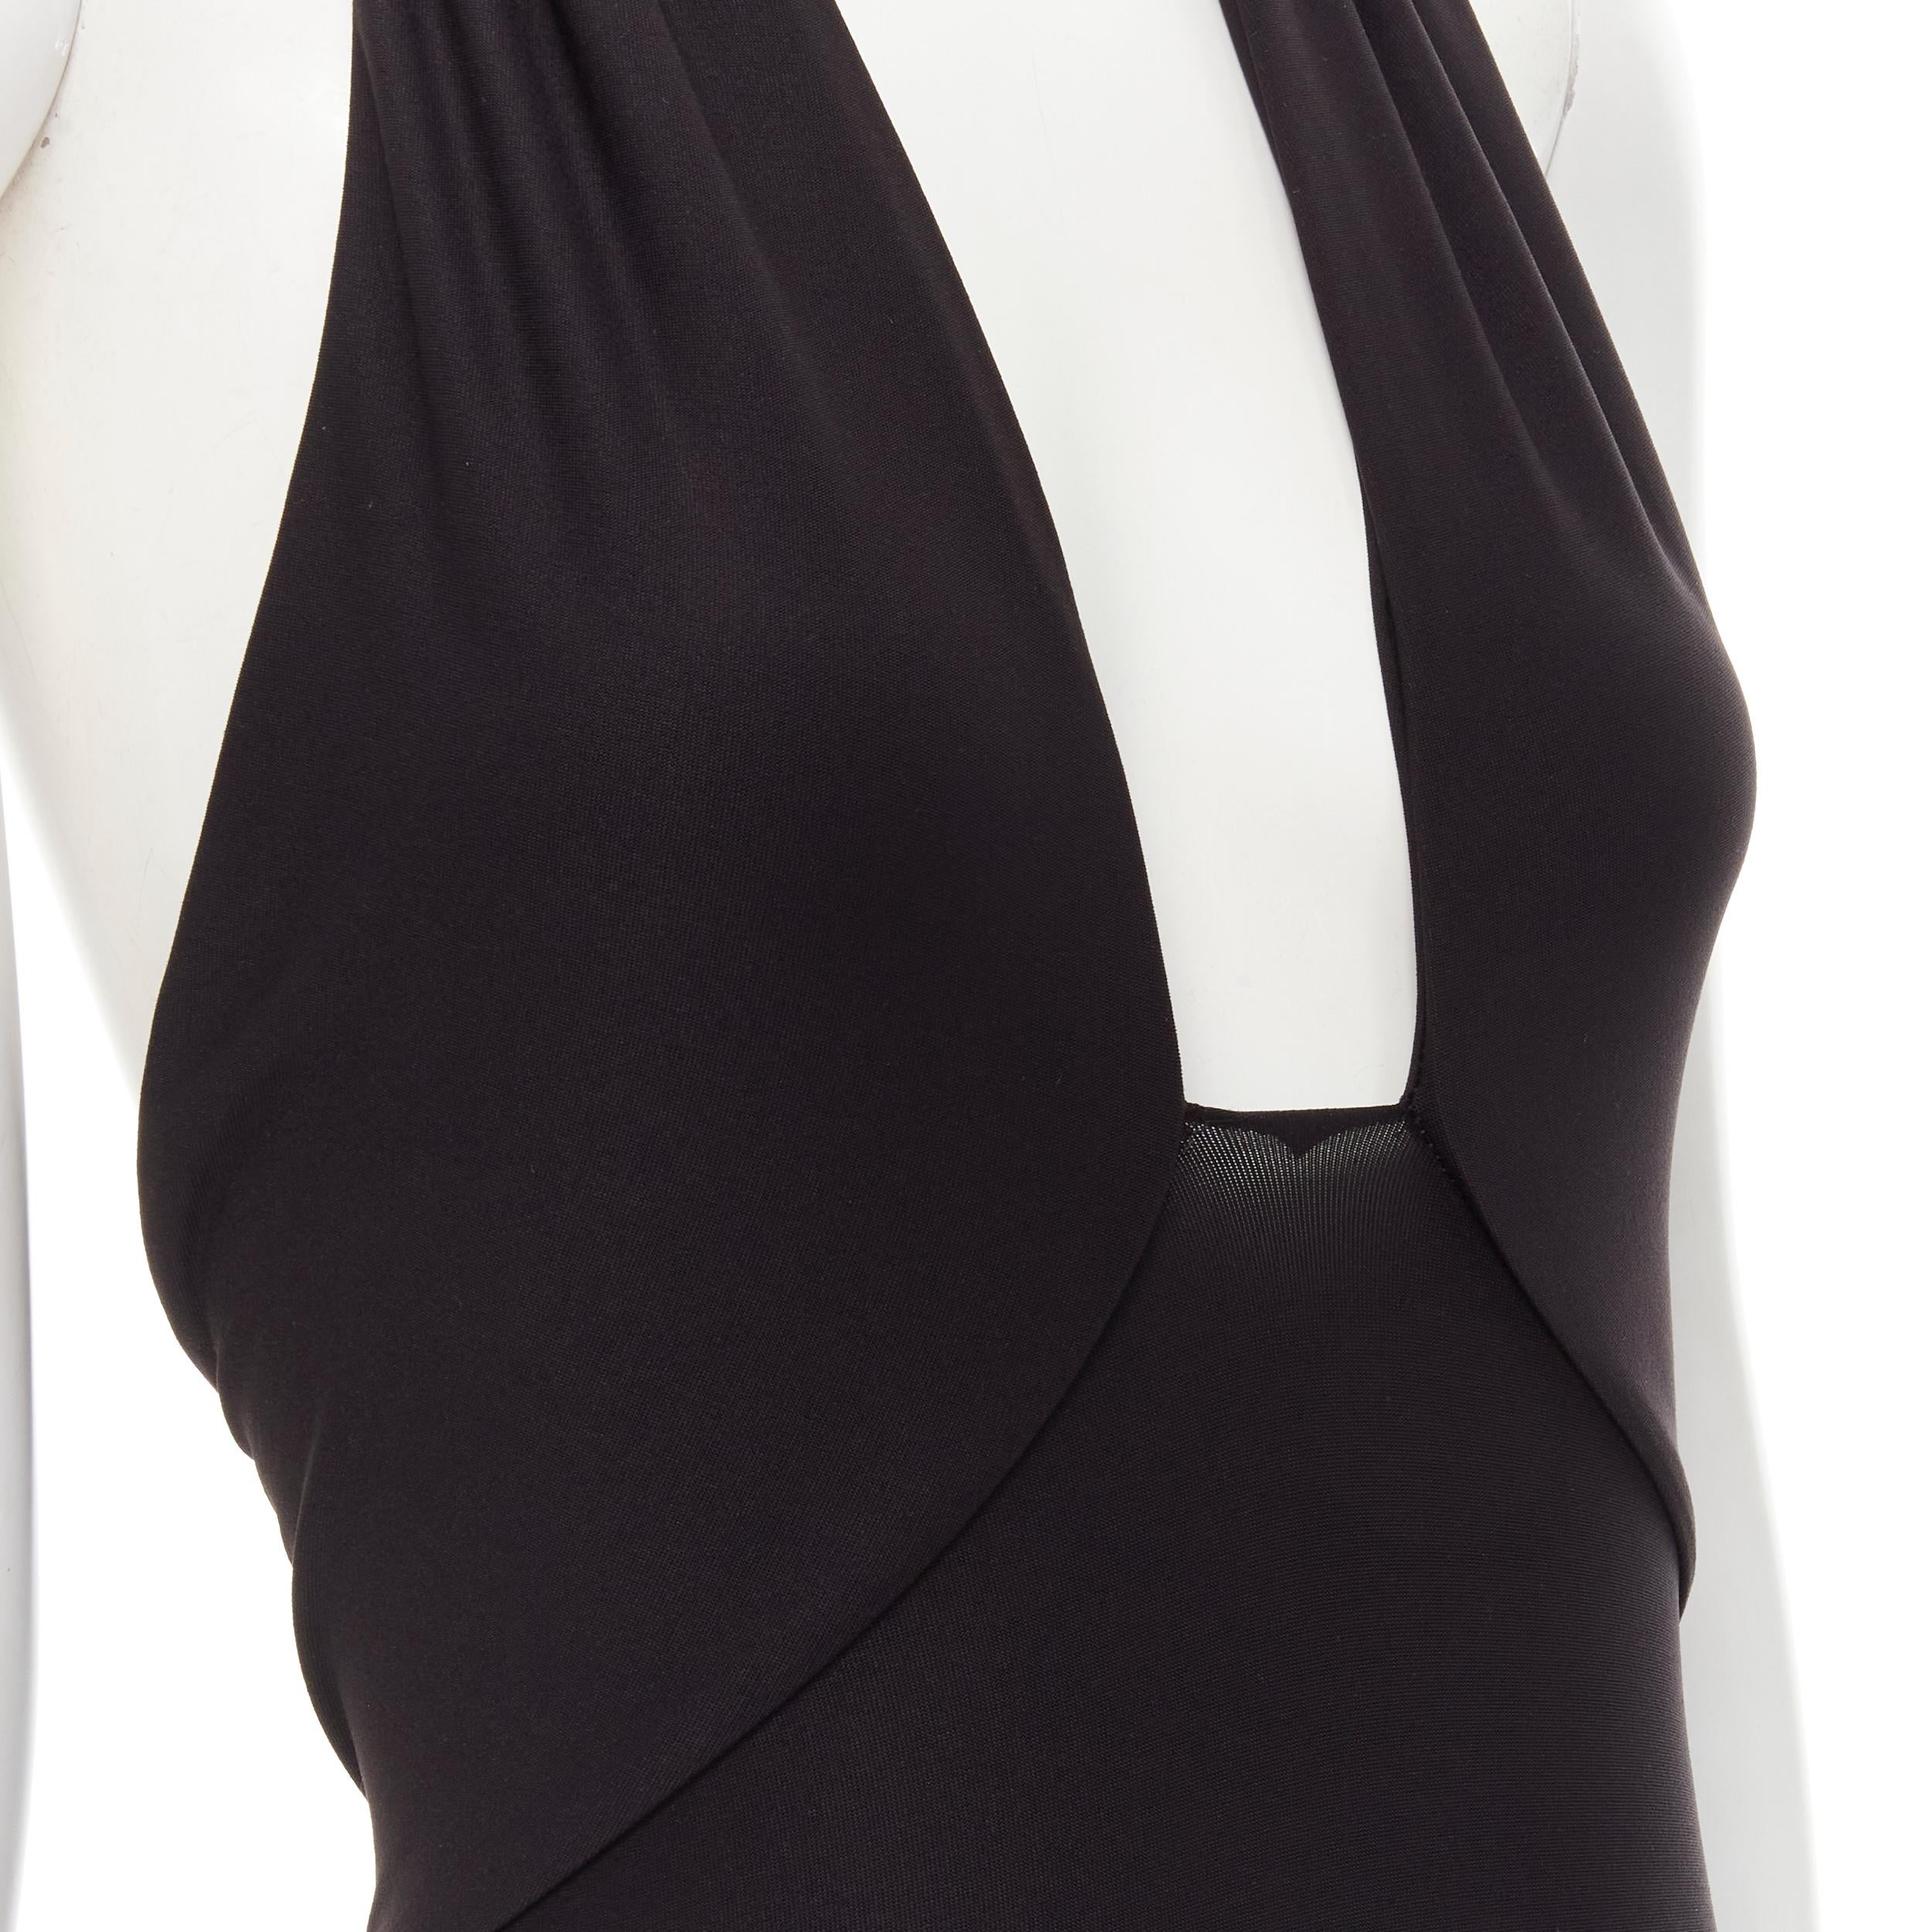 ALIX NYC black plunge neck halter open back body suit top XS 
Reference: LNKO/A01905 
Brand: ALIX NYC 
Material: Elastane 
Color: Black 
Pattern: Solid 
Closure: Hook & Eye 
Extra Detail: Snap button at crotch. 
Estimated Retail Price: US $170 
Made